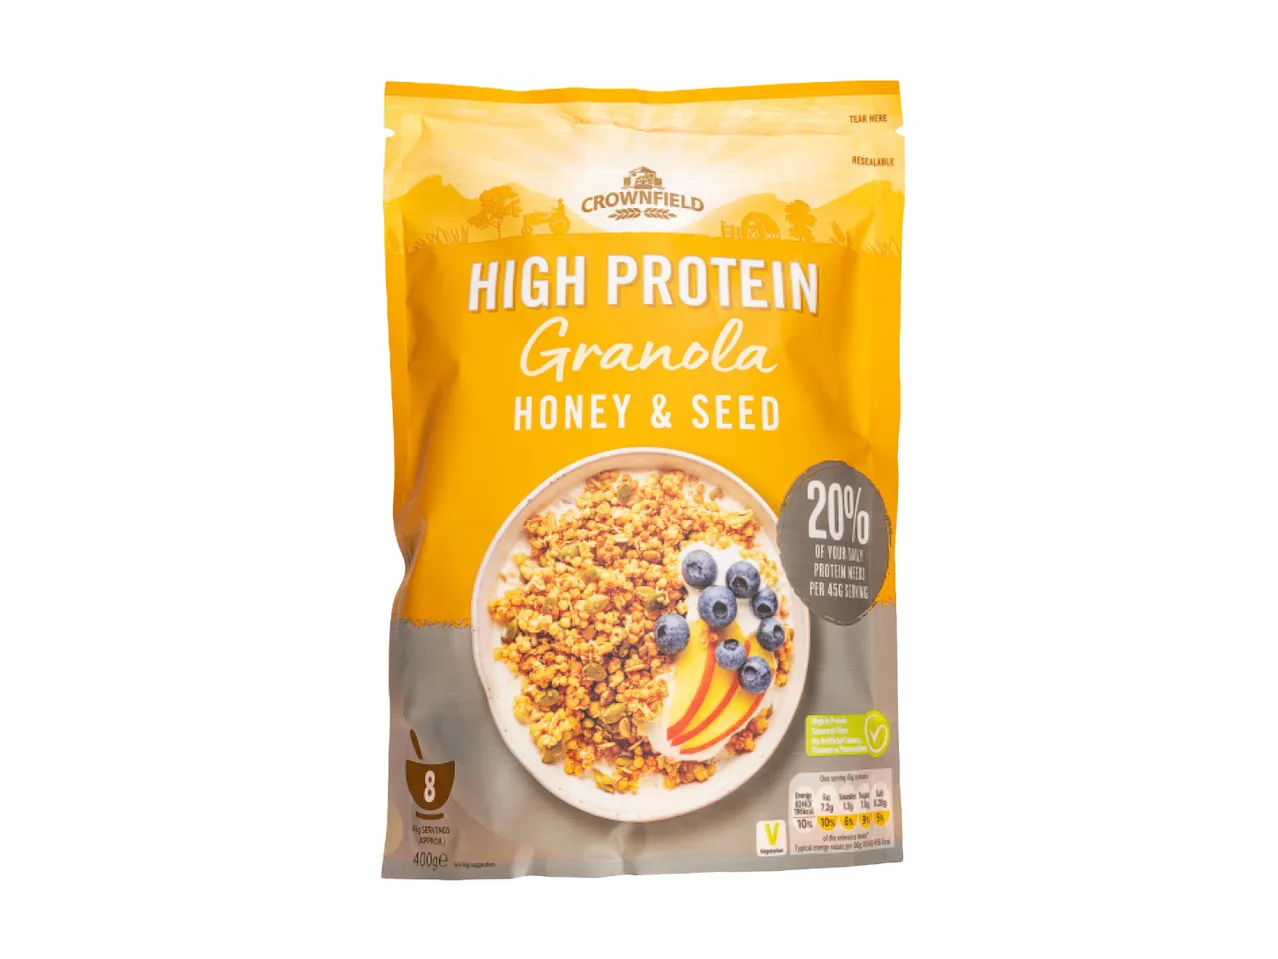 Go to full screen view: Crownfield High Protein Granola - Image 1